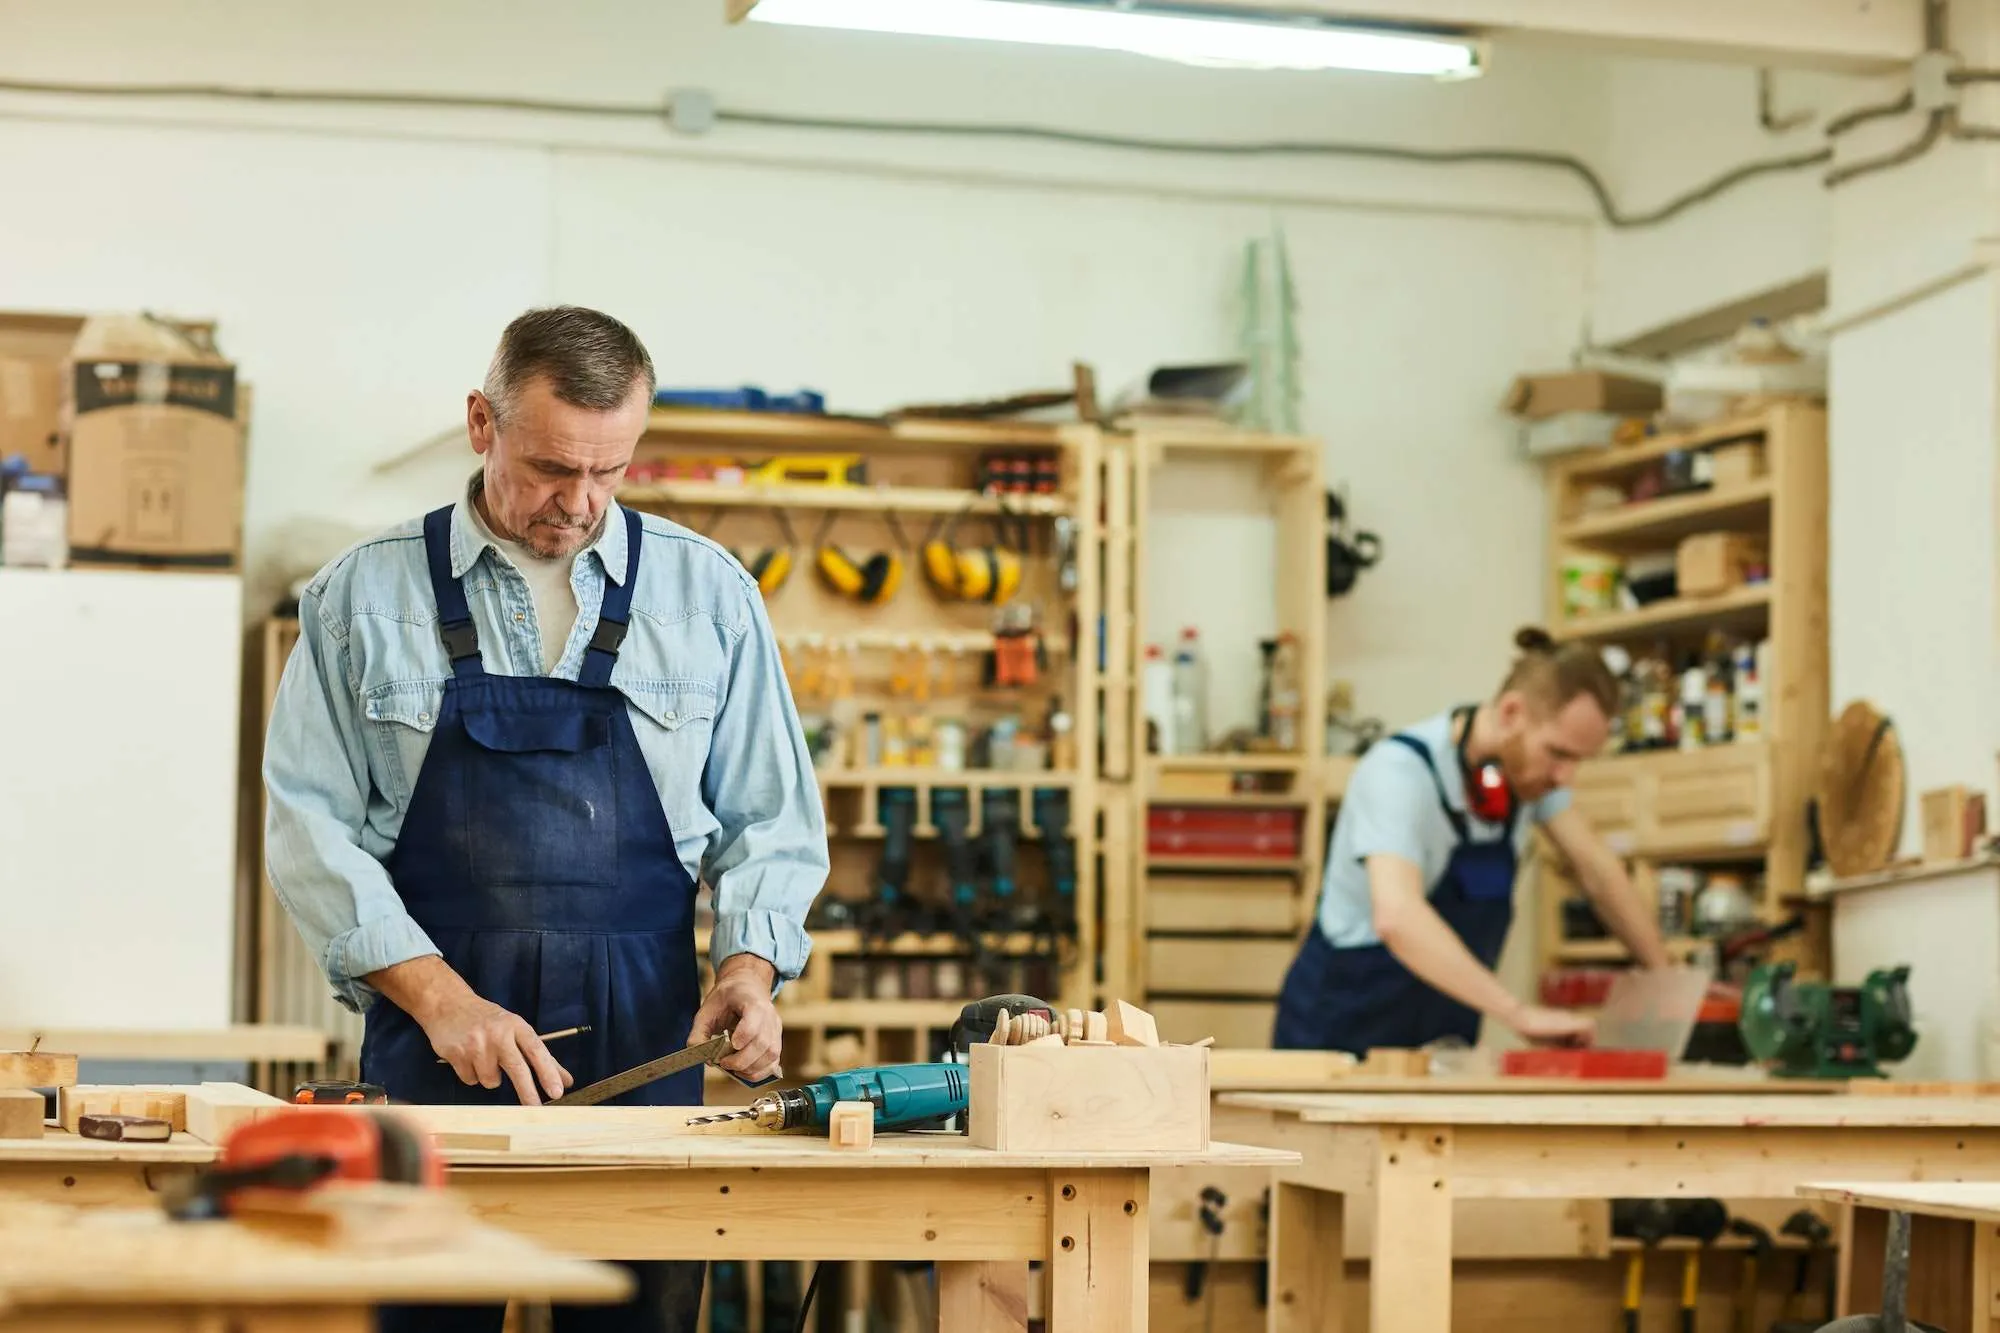 Ensure your carpentry business is safeguarded with our liability insurance, offering access to 50+ carriers for optimal coverage & rates.